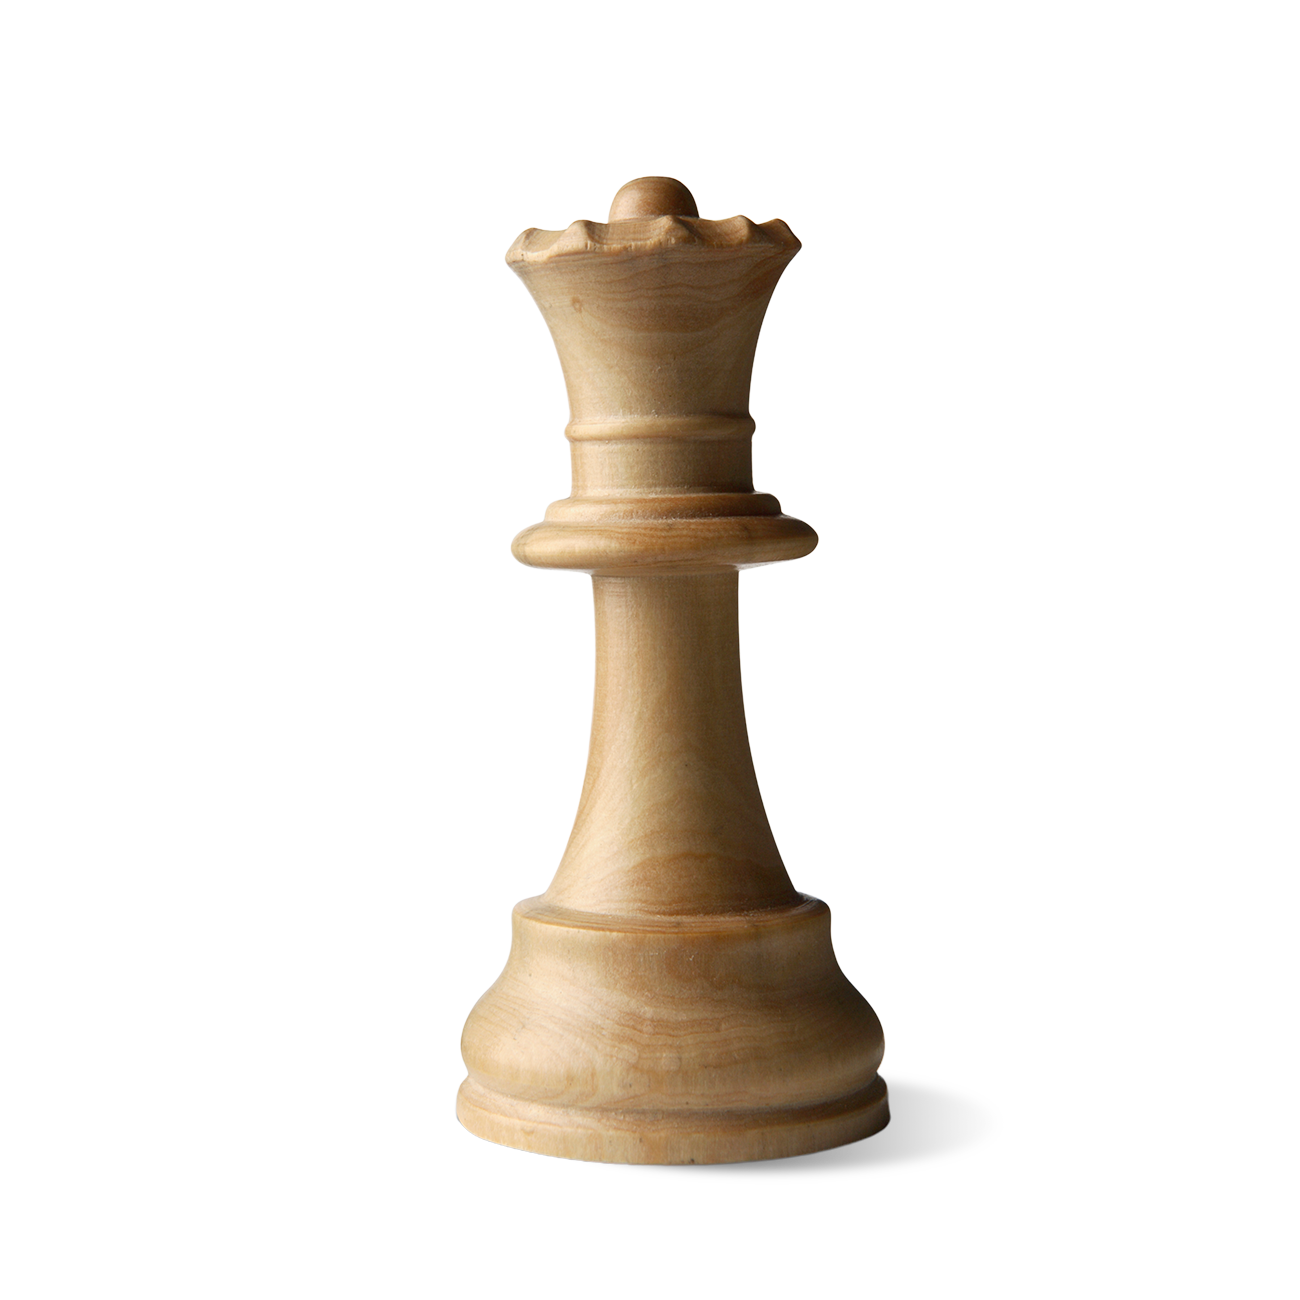 A queen chess piece made of wood